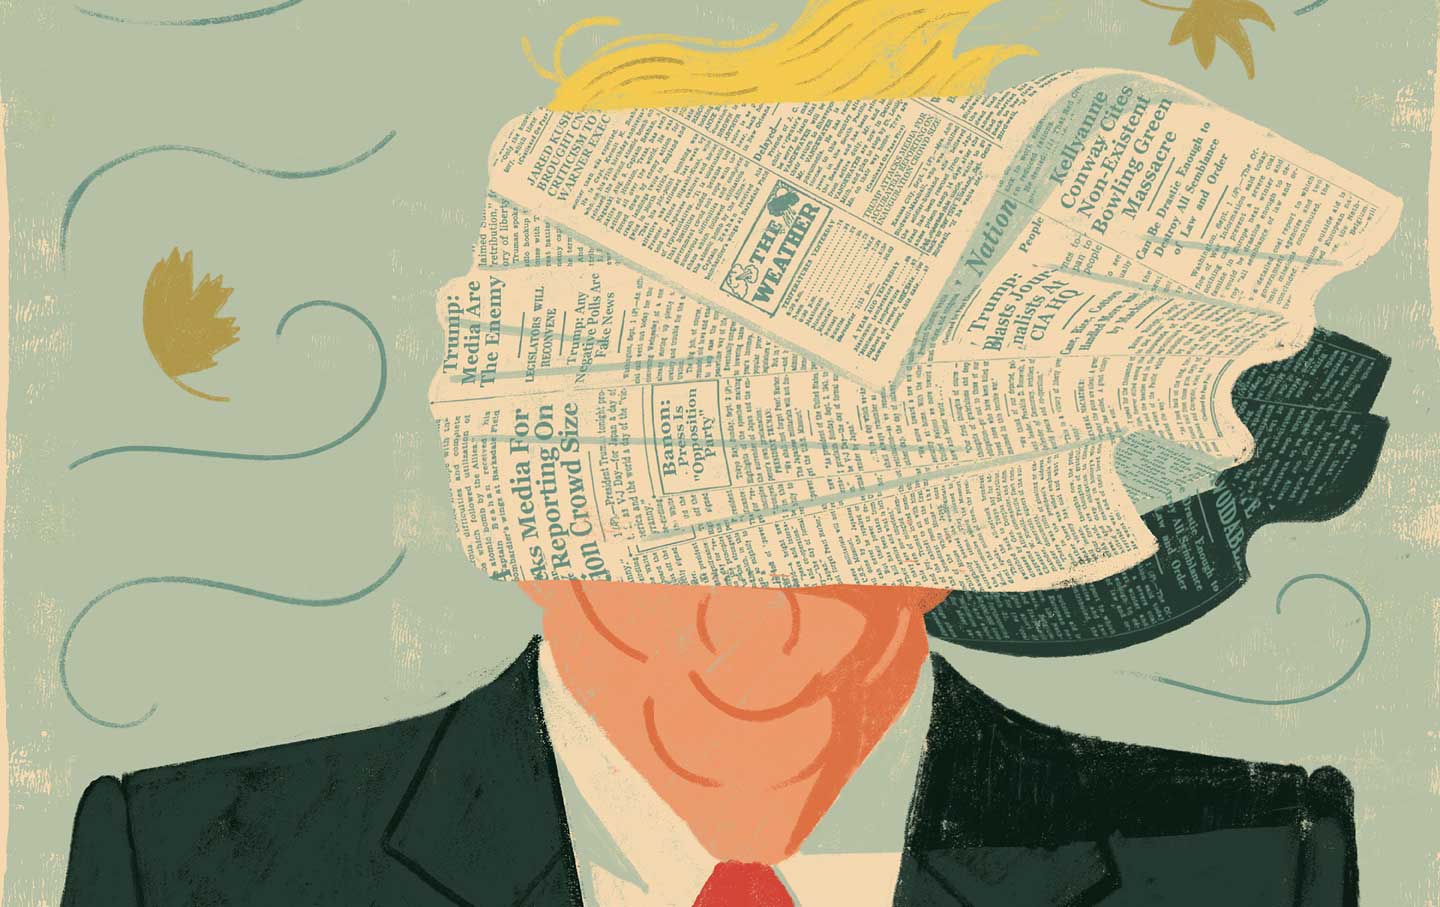 Trump Versus the Media: How to Cover a Hostile President